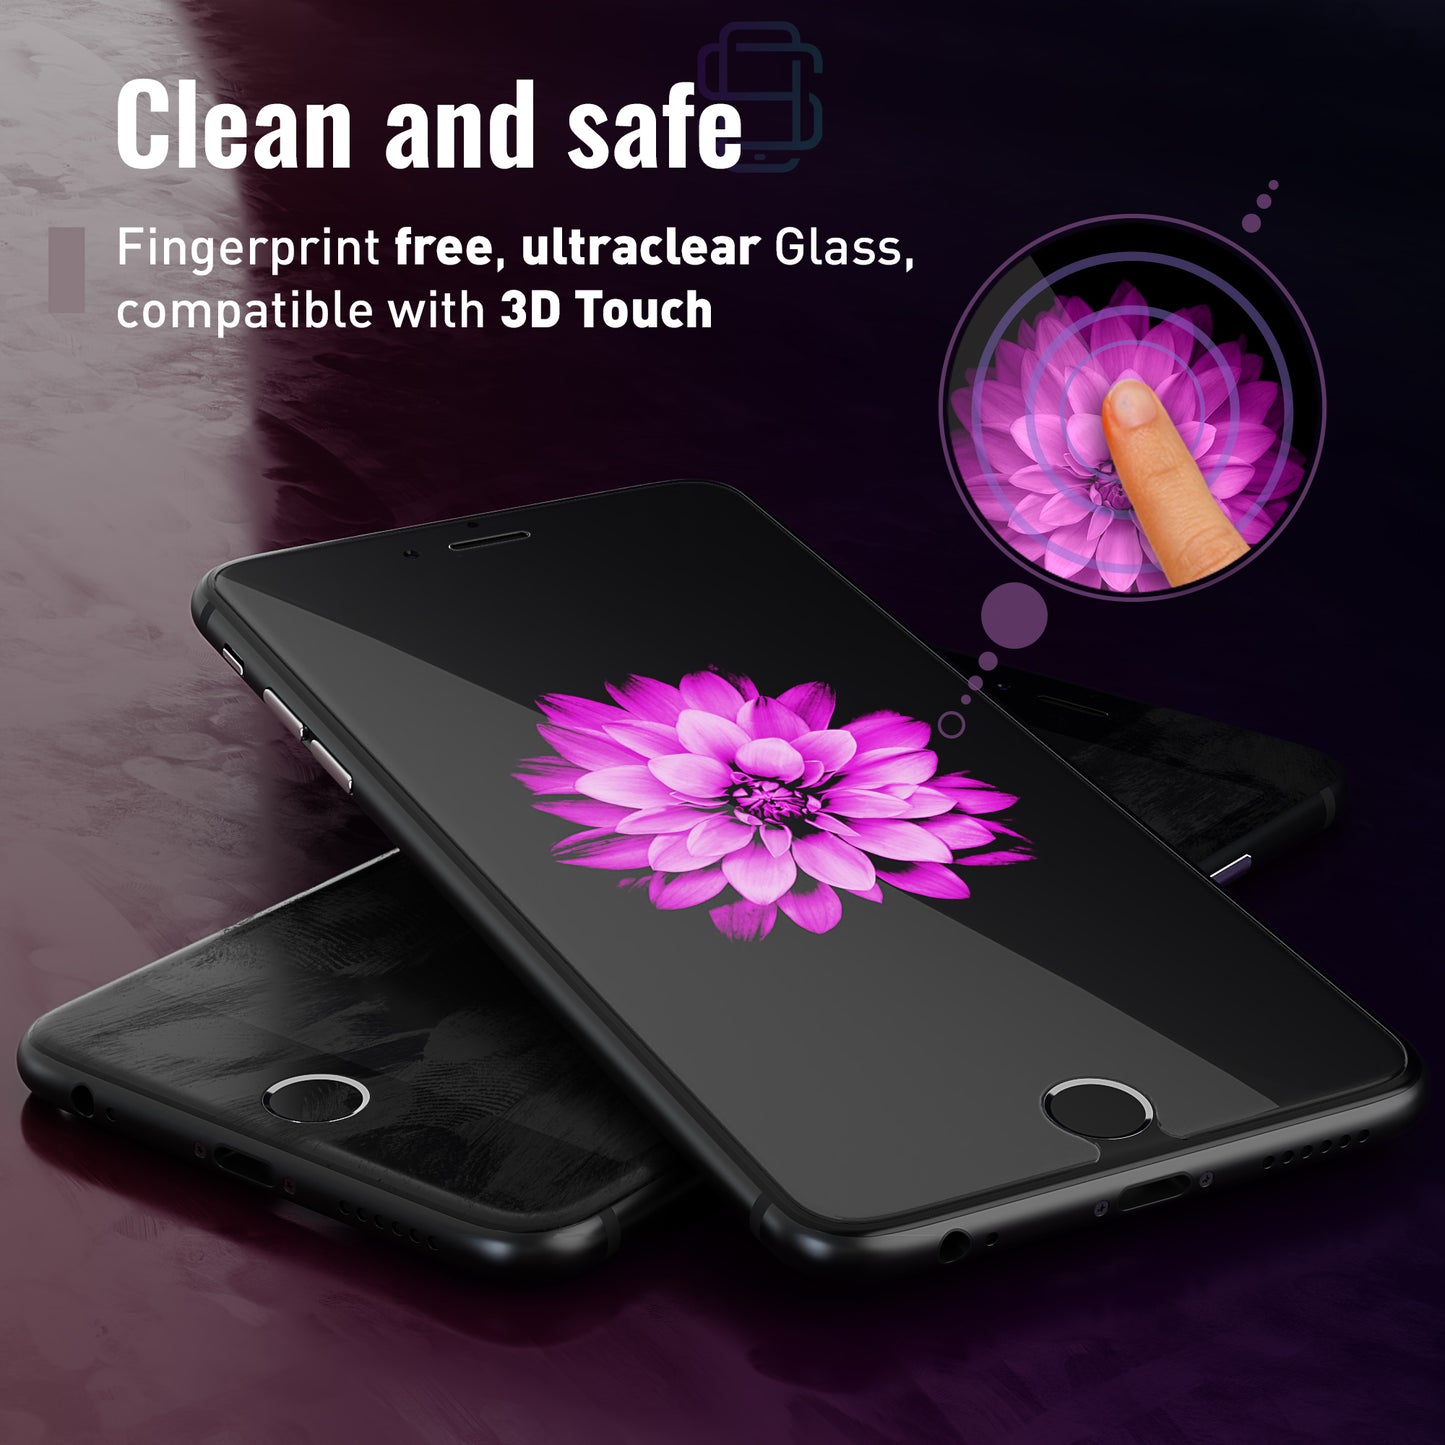 Defenslim iPhone 6s Plus Screen Protector [2-Pack] with Easy Auto-Align Install Kit